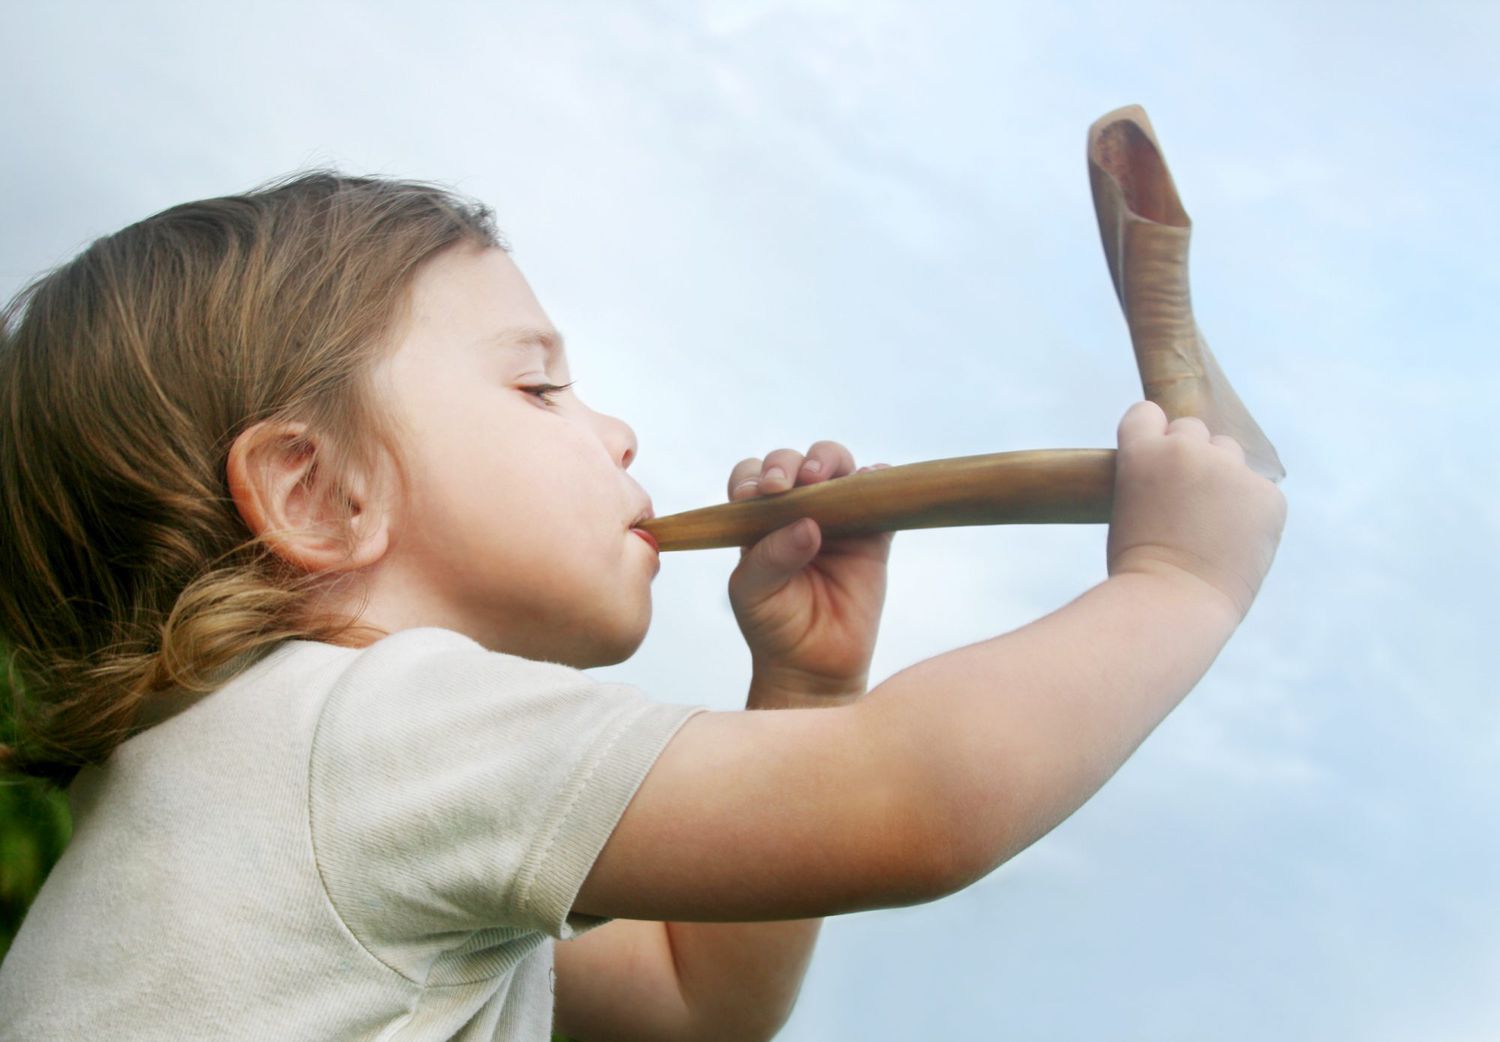 An image of a child blowing a shofar.